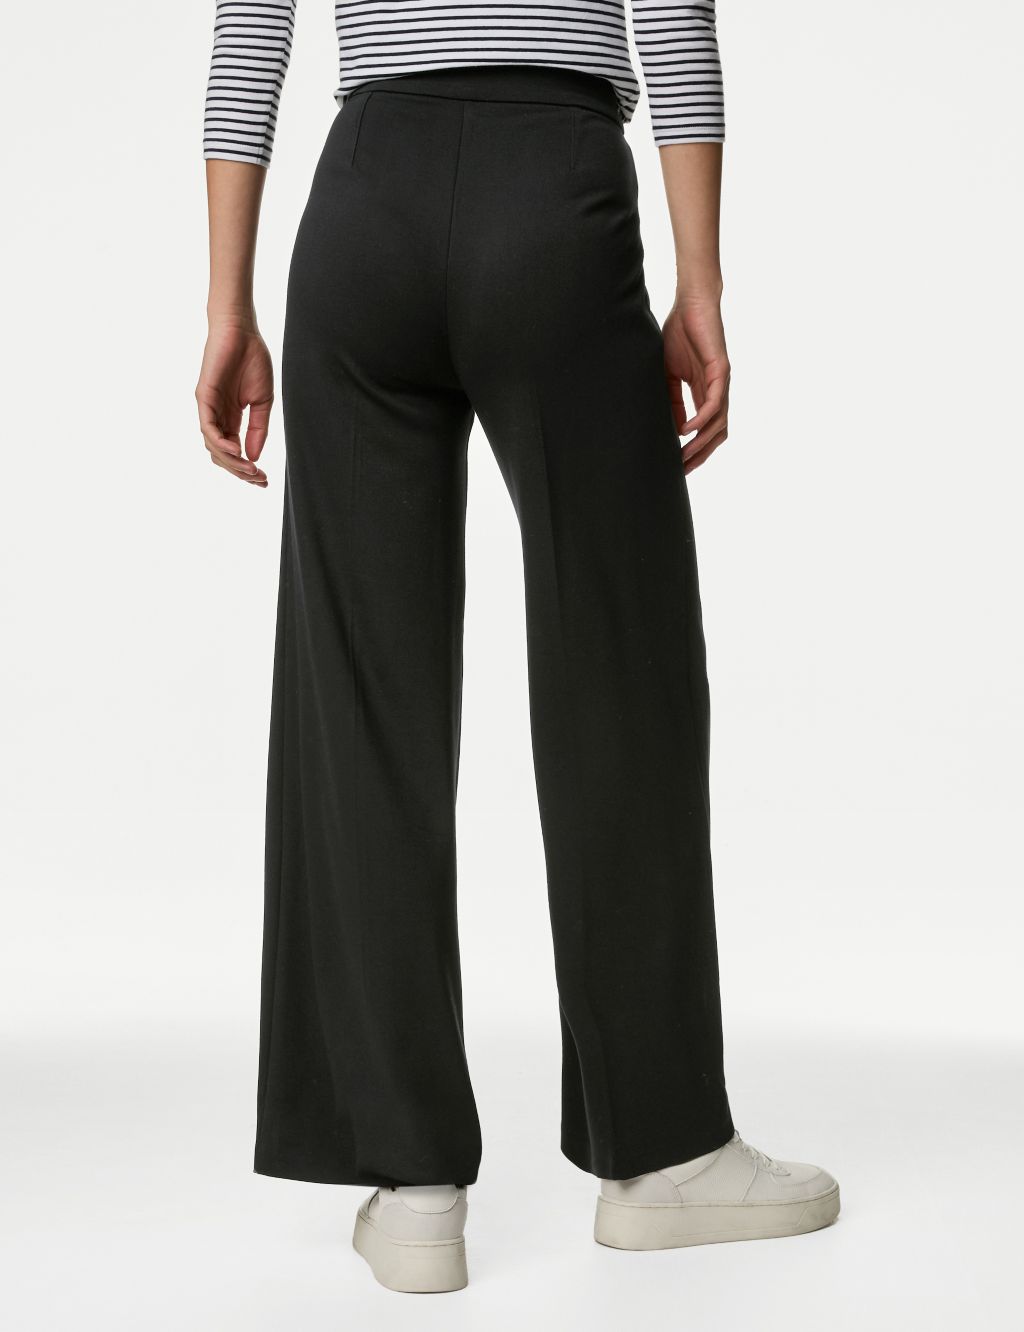 Jersey Wide Leg Trousers with Stretch image 5